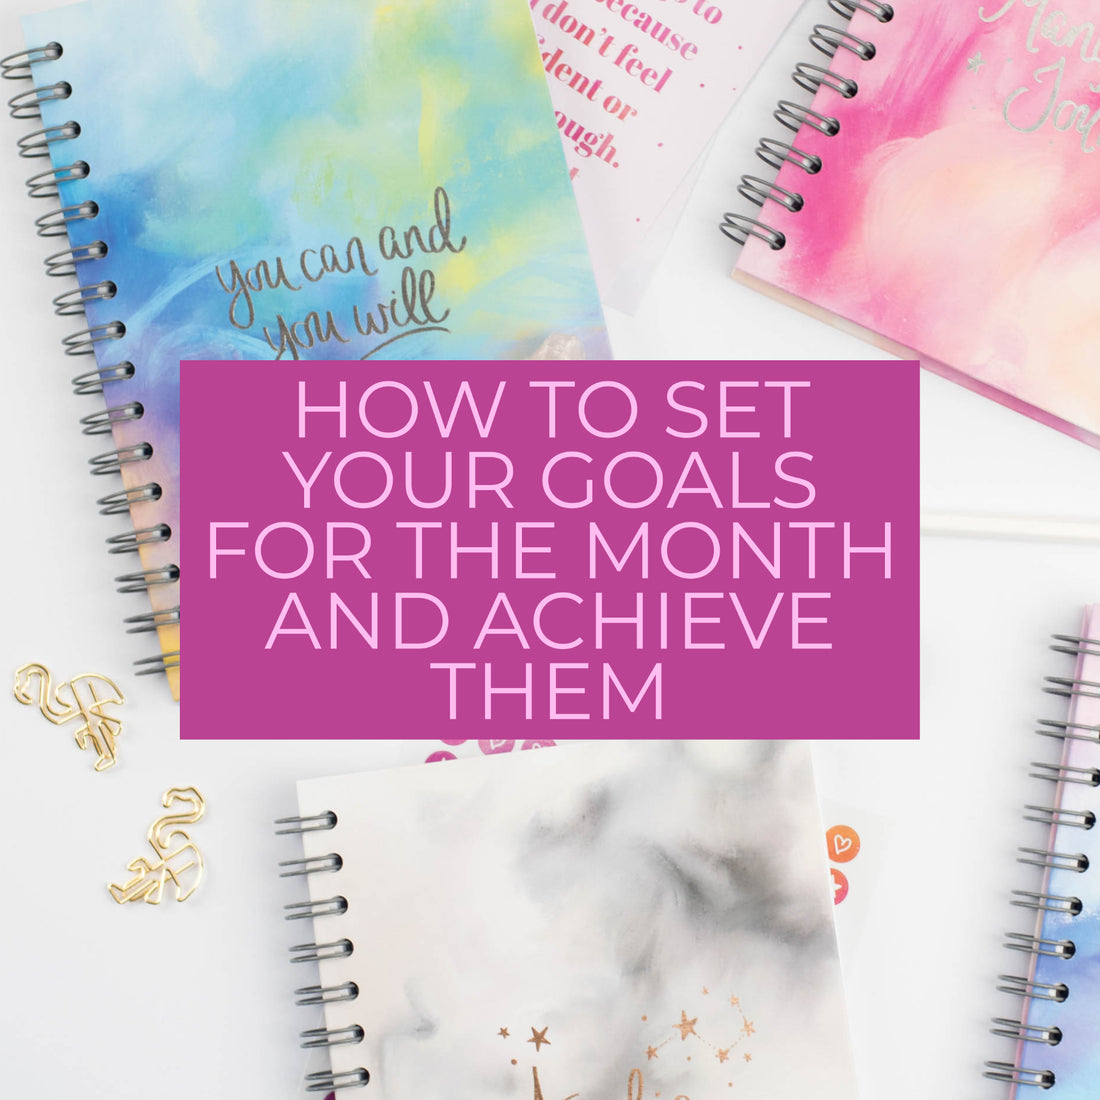 HOW TO SET YOUR GOALS FOR THE MONTH AND ACHIEVE THEM